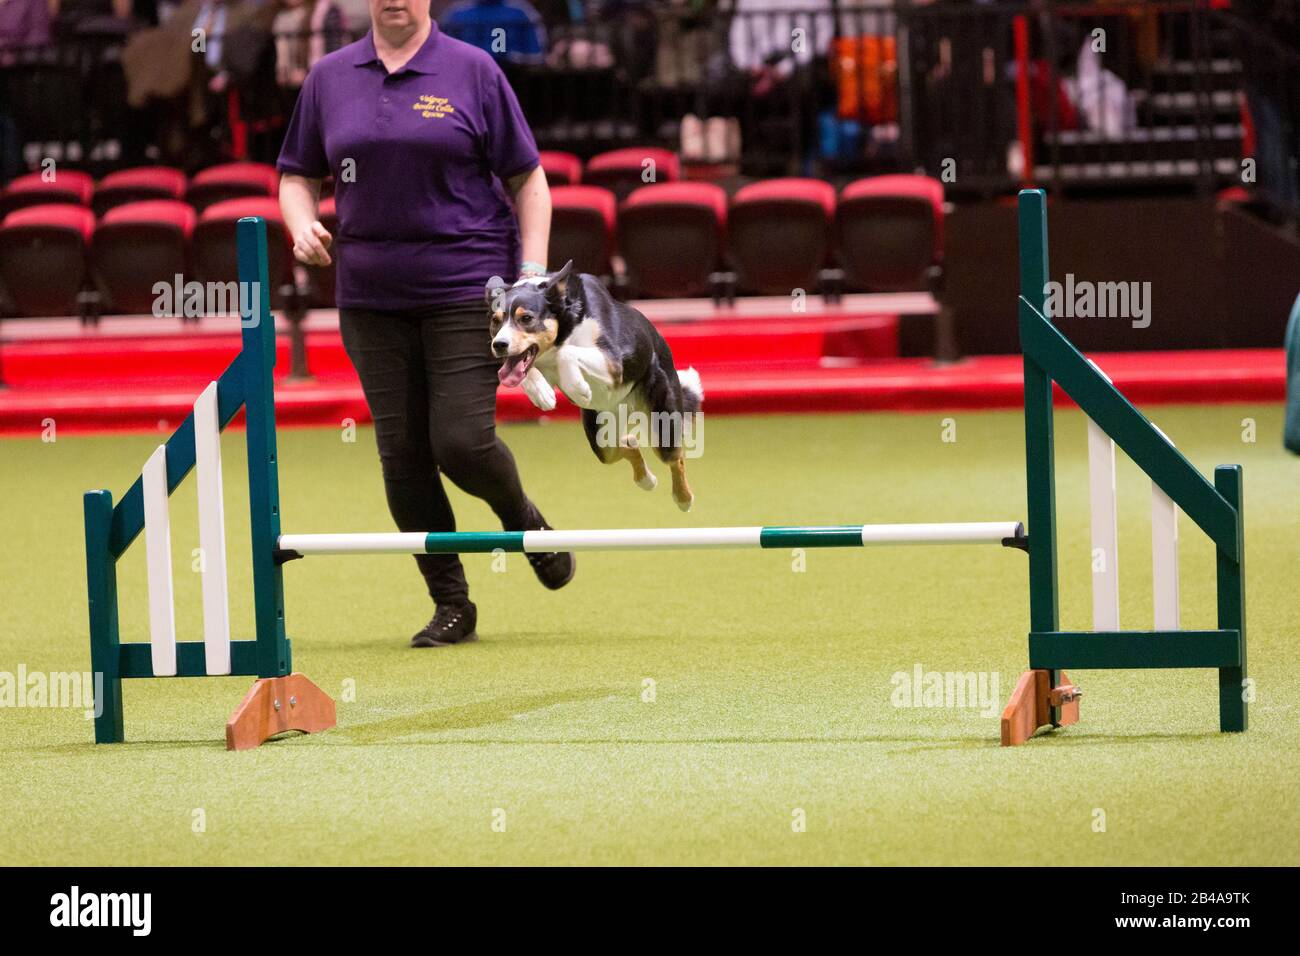 Birmingham, UK. 6th Mar, 2020. Rescue dogs take part in an Agility display on the second day of Crufts. Credit: Jon Freeman/Alamy Live News Credit: Jon Freeman/Alamy Live News Stock Photo